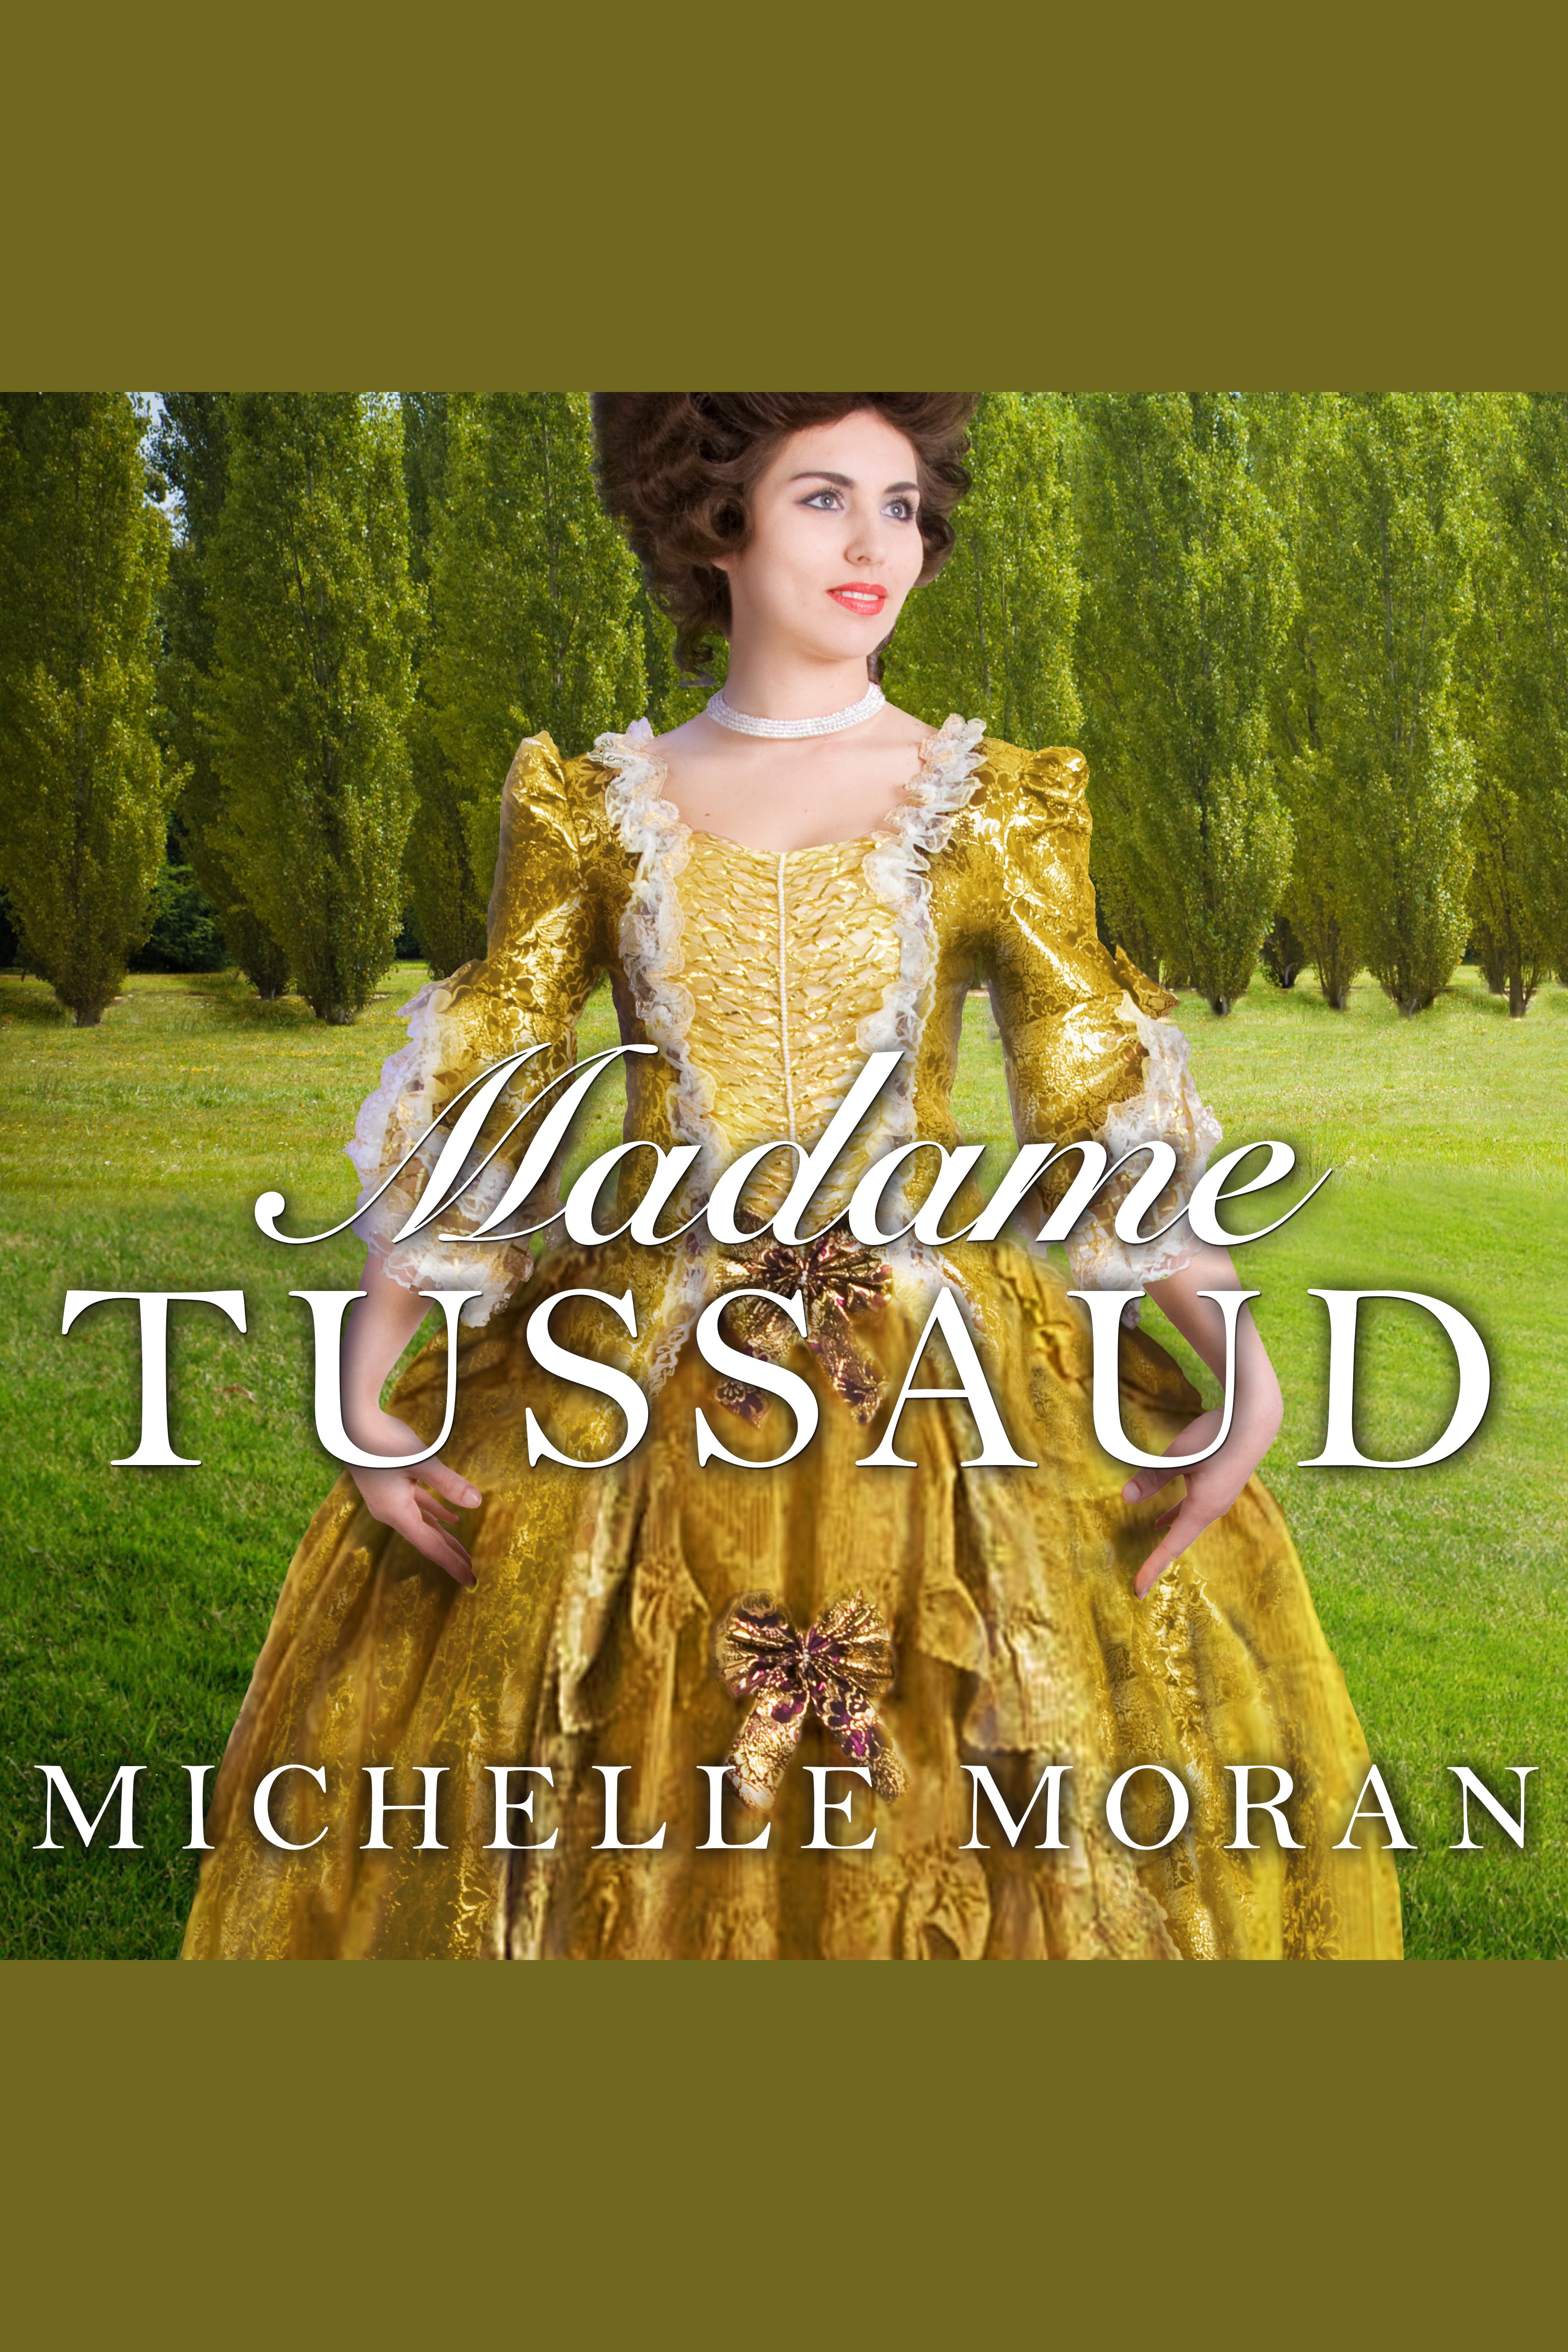 Umschlagbild für Madame Tussaud [electronic resource] : A Novel of the French Revolution